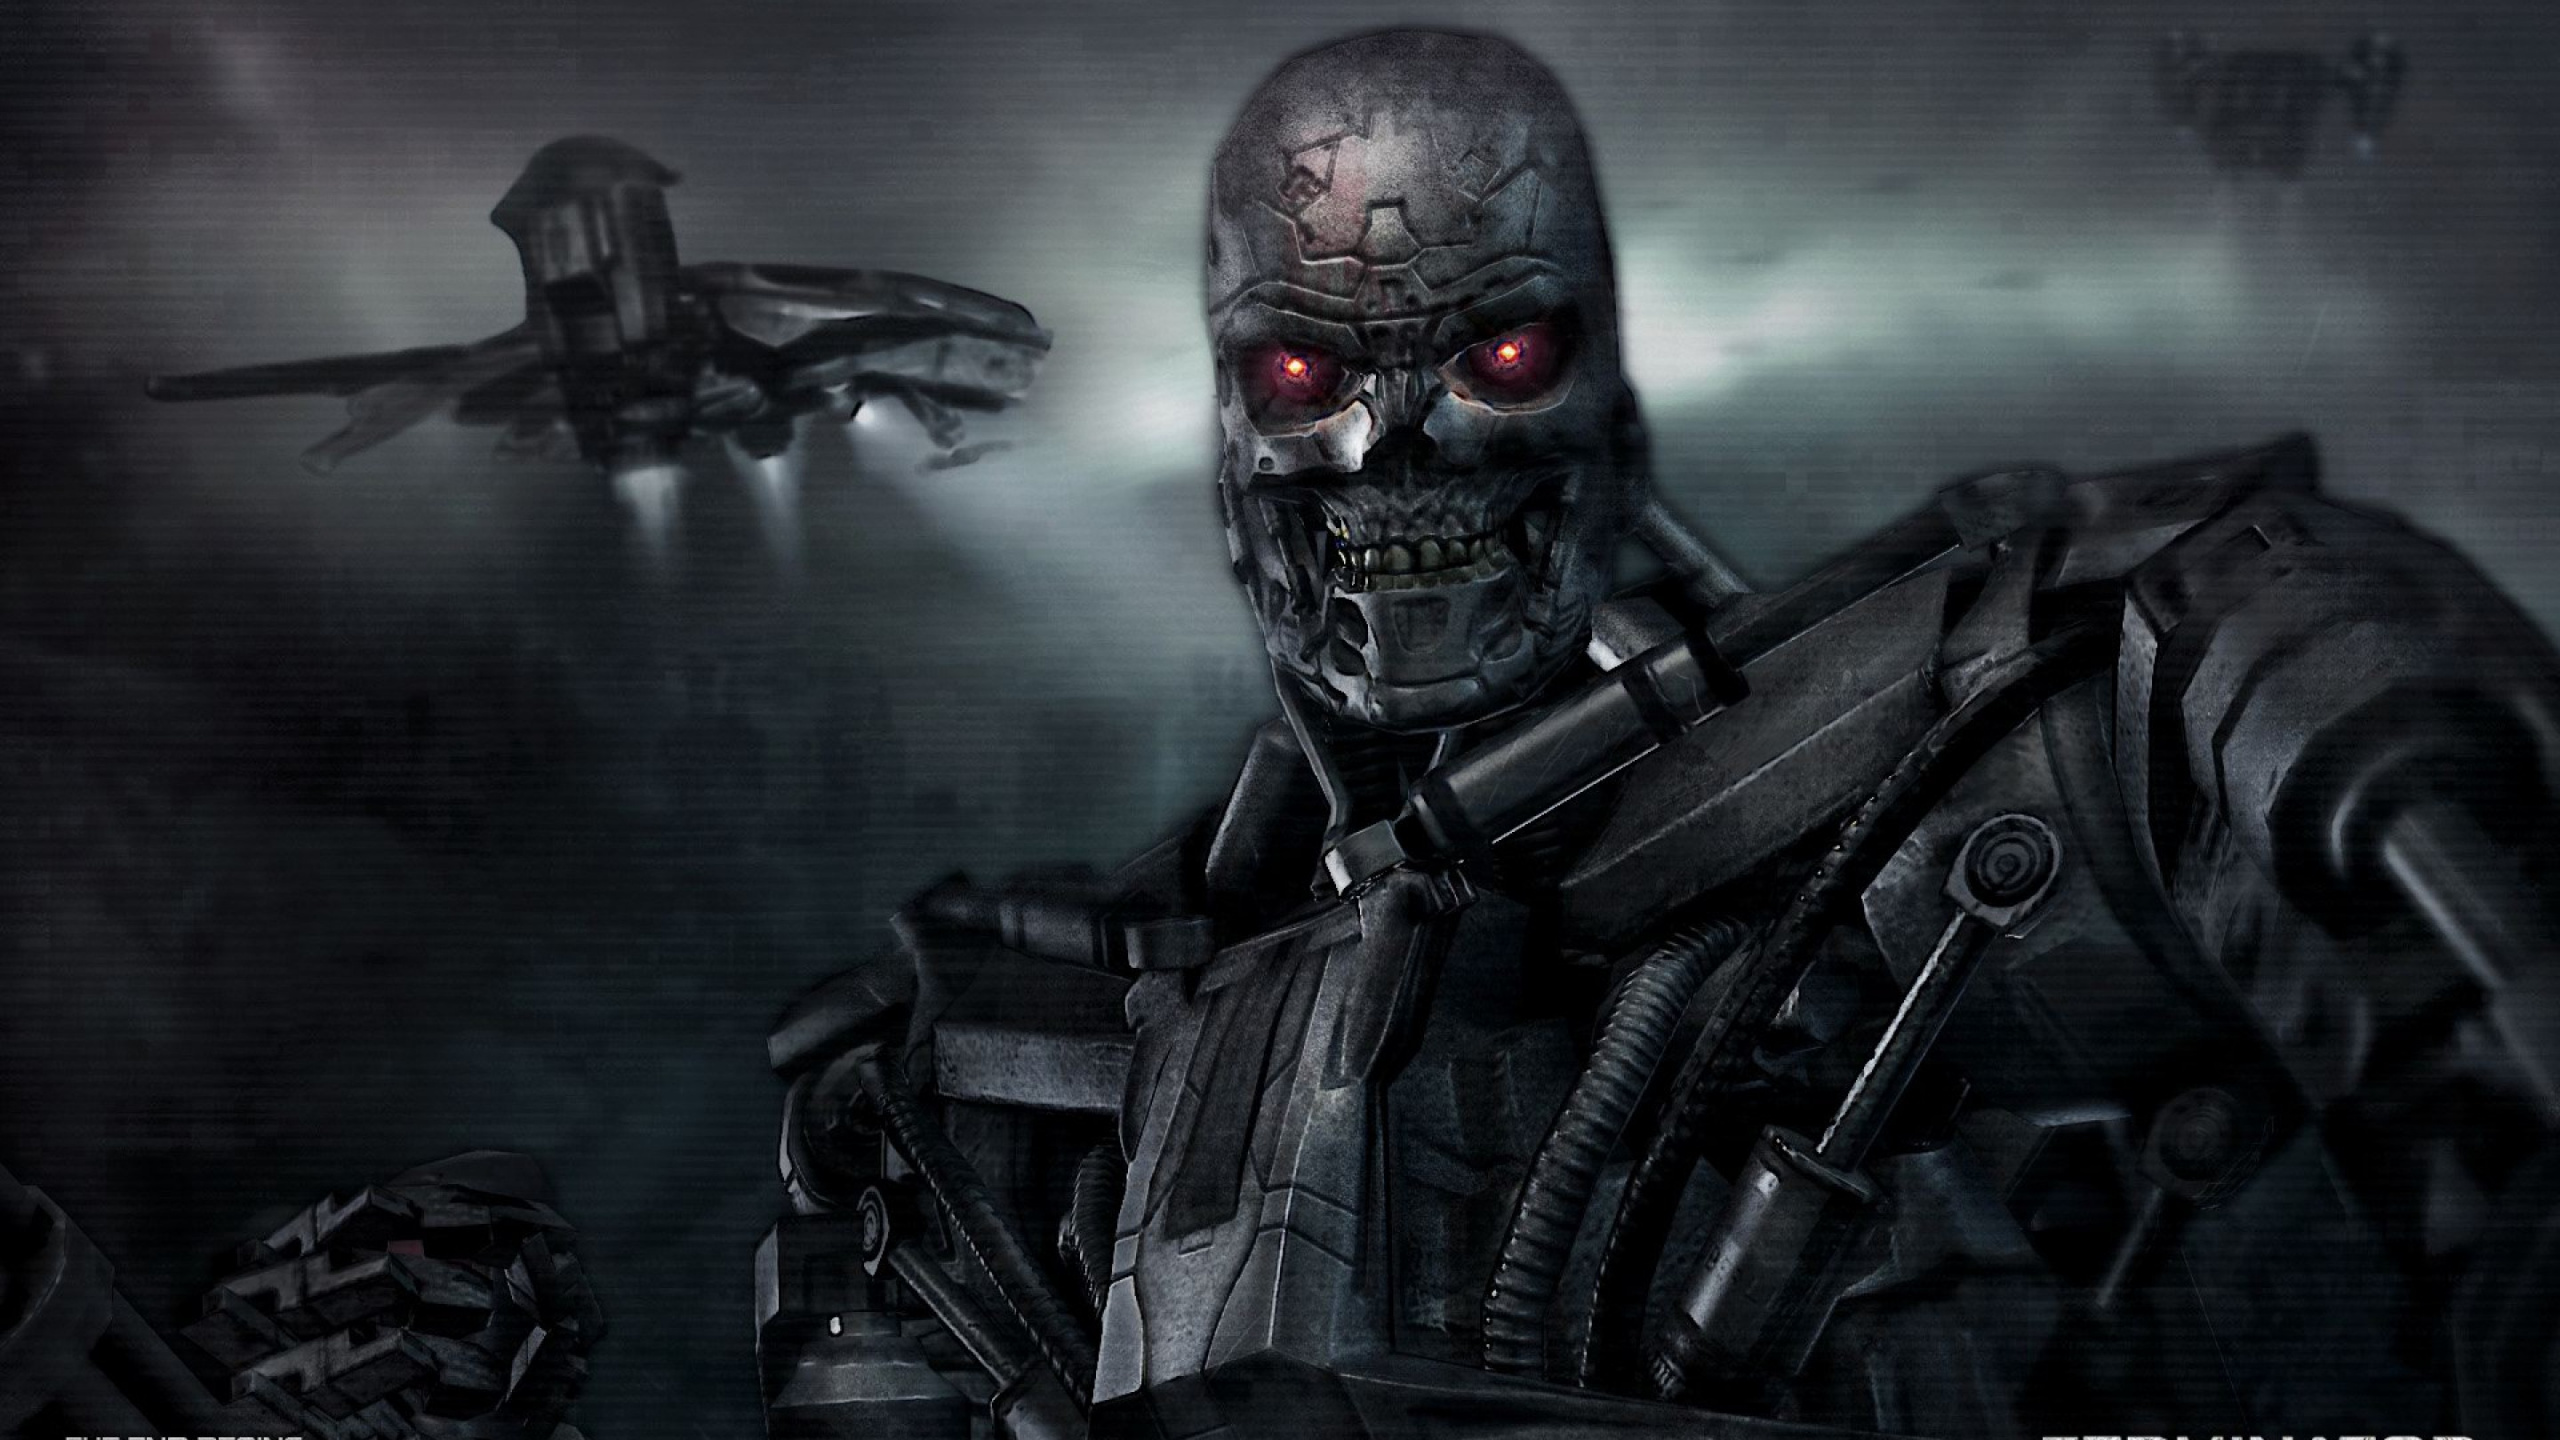 Black and Red Skull With Black and Gray Vest. Wallpaper in 2560x1440 Resolution